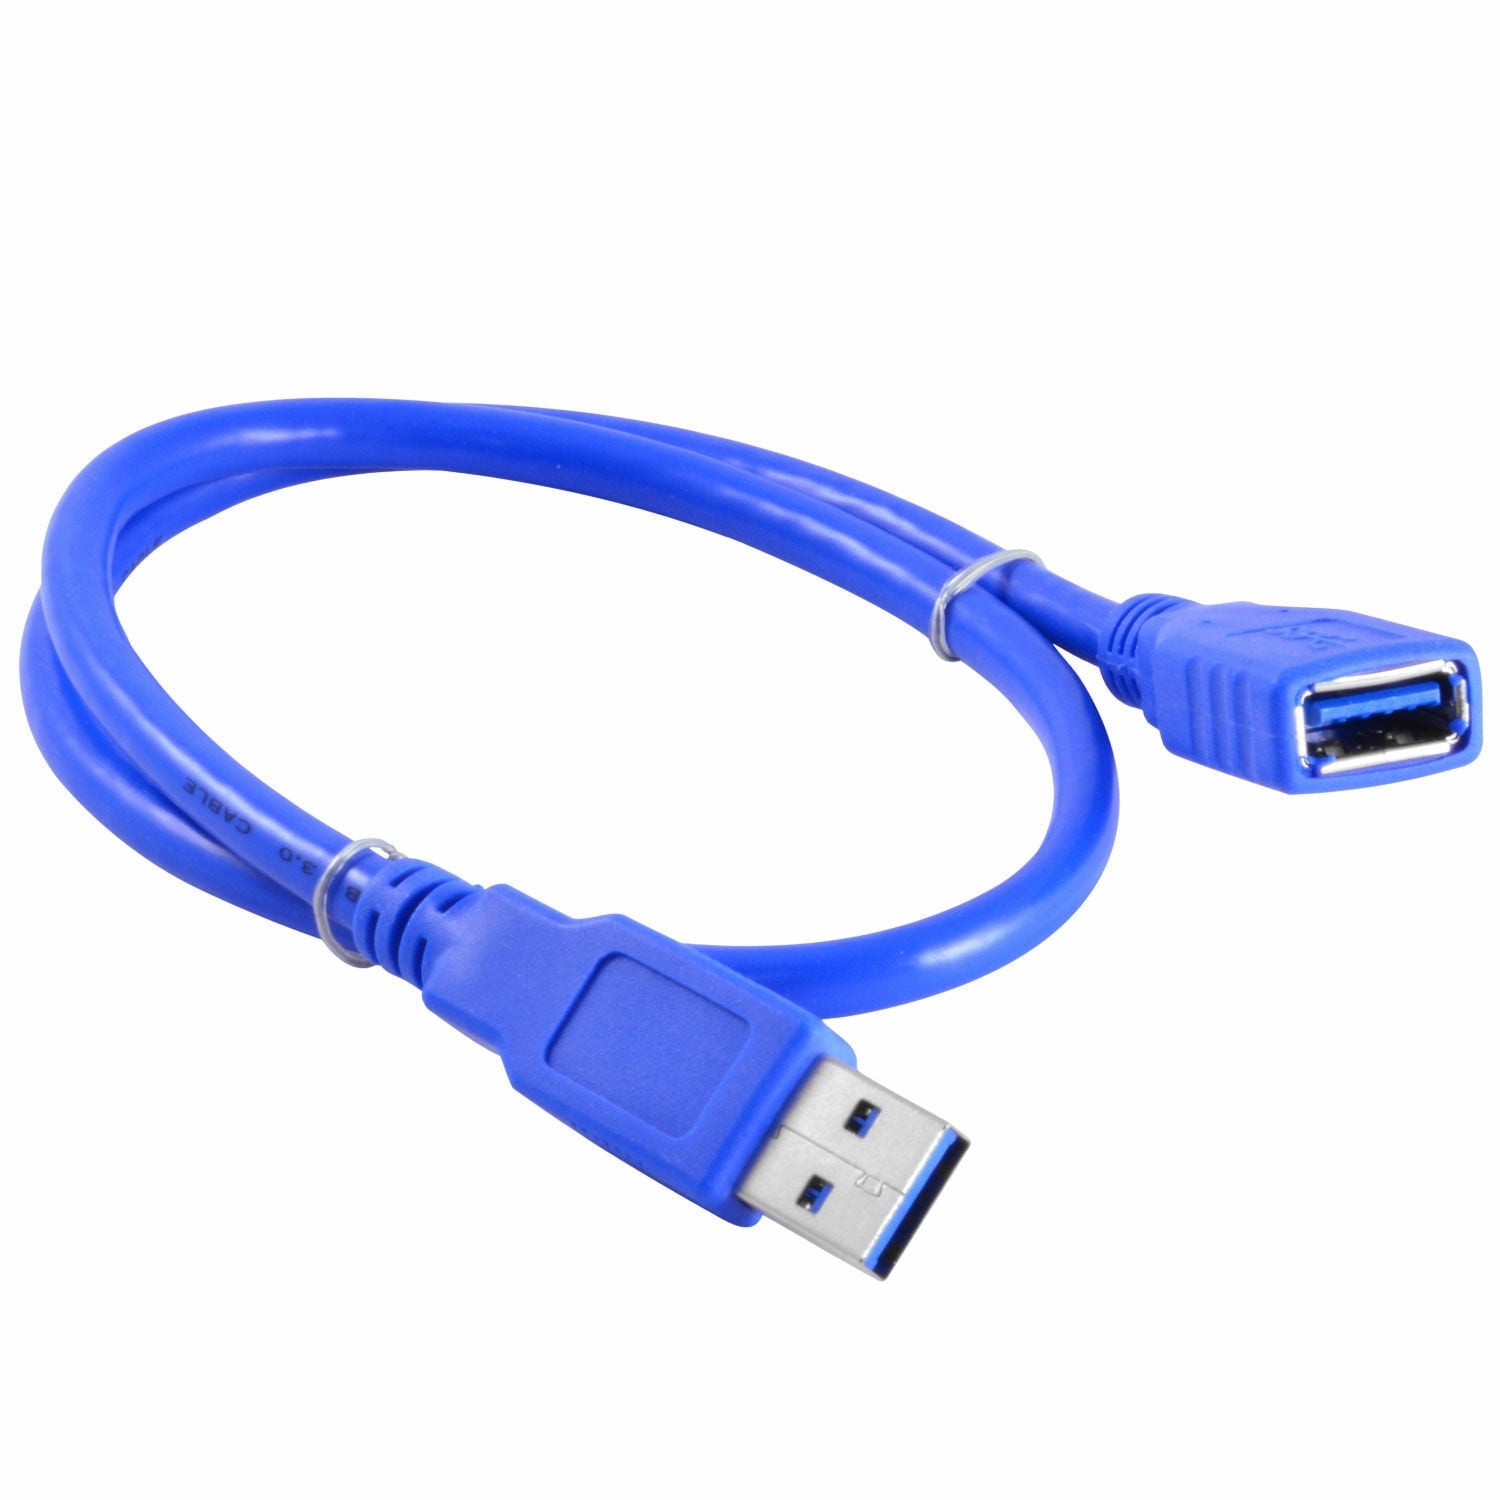 USB 3.0 Extension Cable Blue ( 1.5FT ) - A Male to Female Extender Cord Data Transfer for Playstation, Xbox, Oculus VR, USB Flash Drive, Card Reader, Hard Drive, Keyboard, Printer, Camera Walmart.com